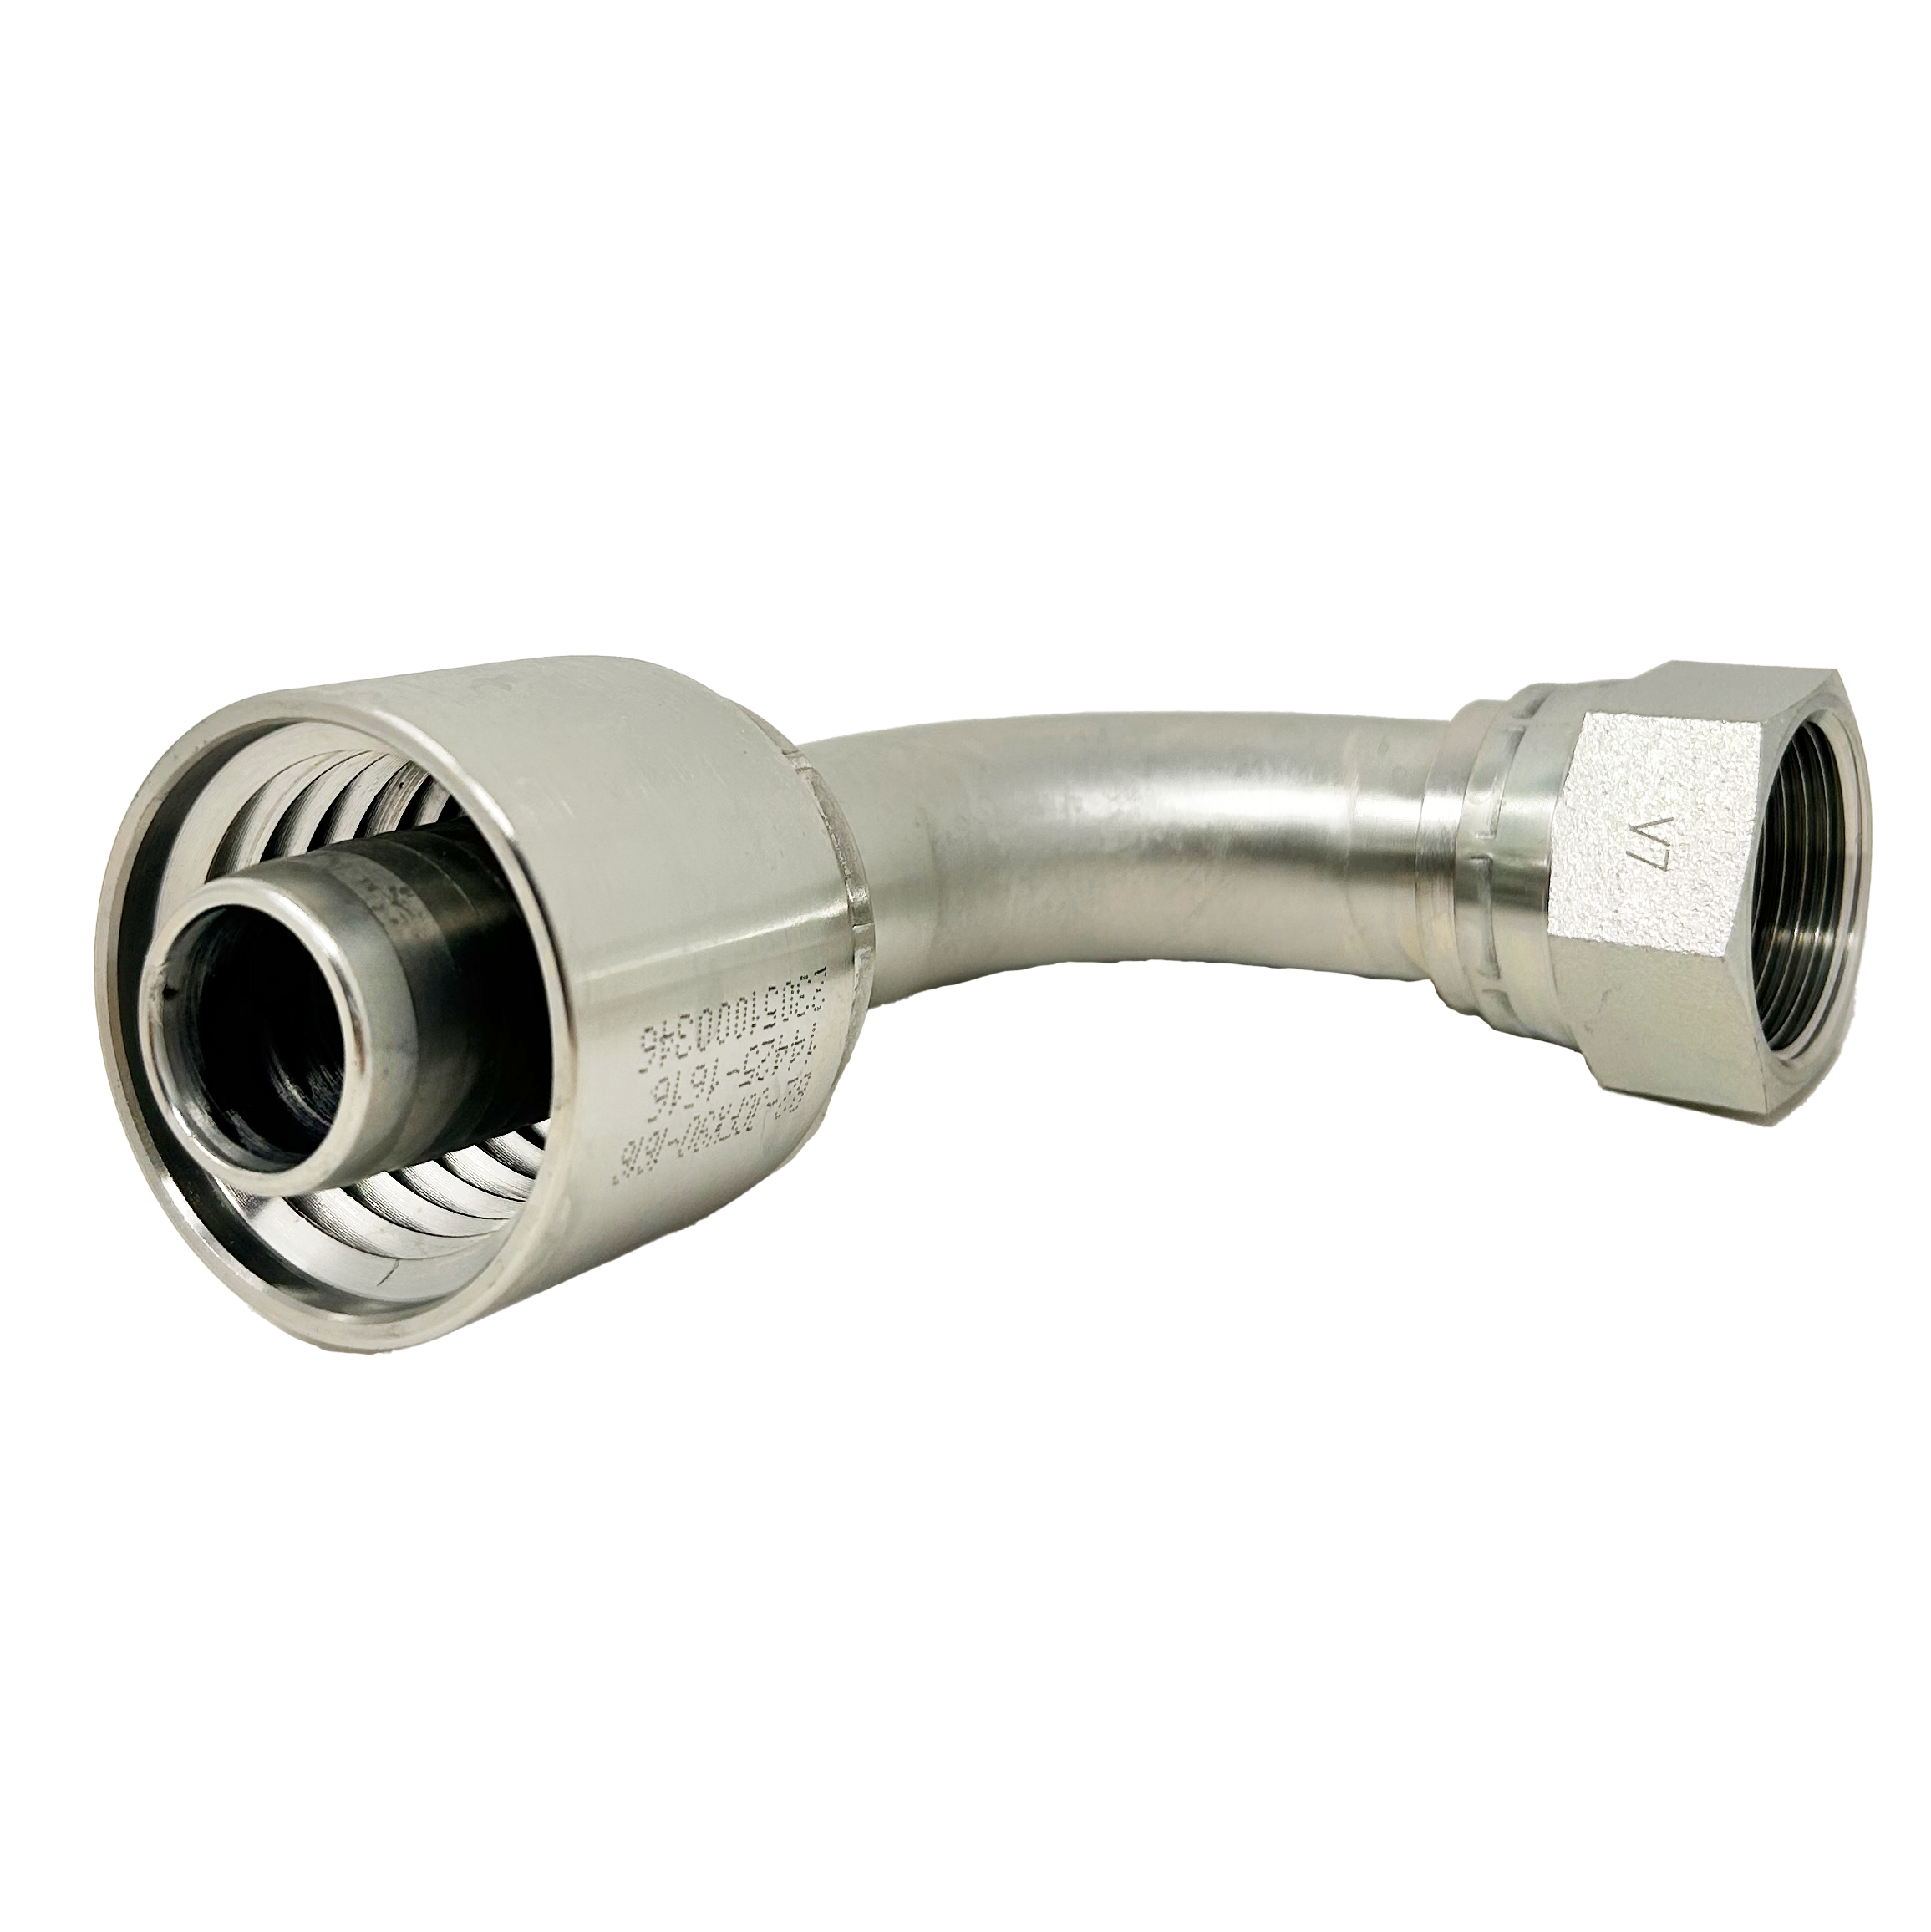 B2-JCFX90-0808S: Continental Hose Fitting, 0.5 (1/2") Hose ID x 3/4-16 Female JIC, 90-Degree Swivel Connection